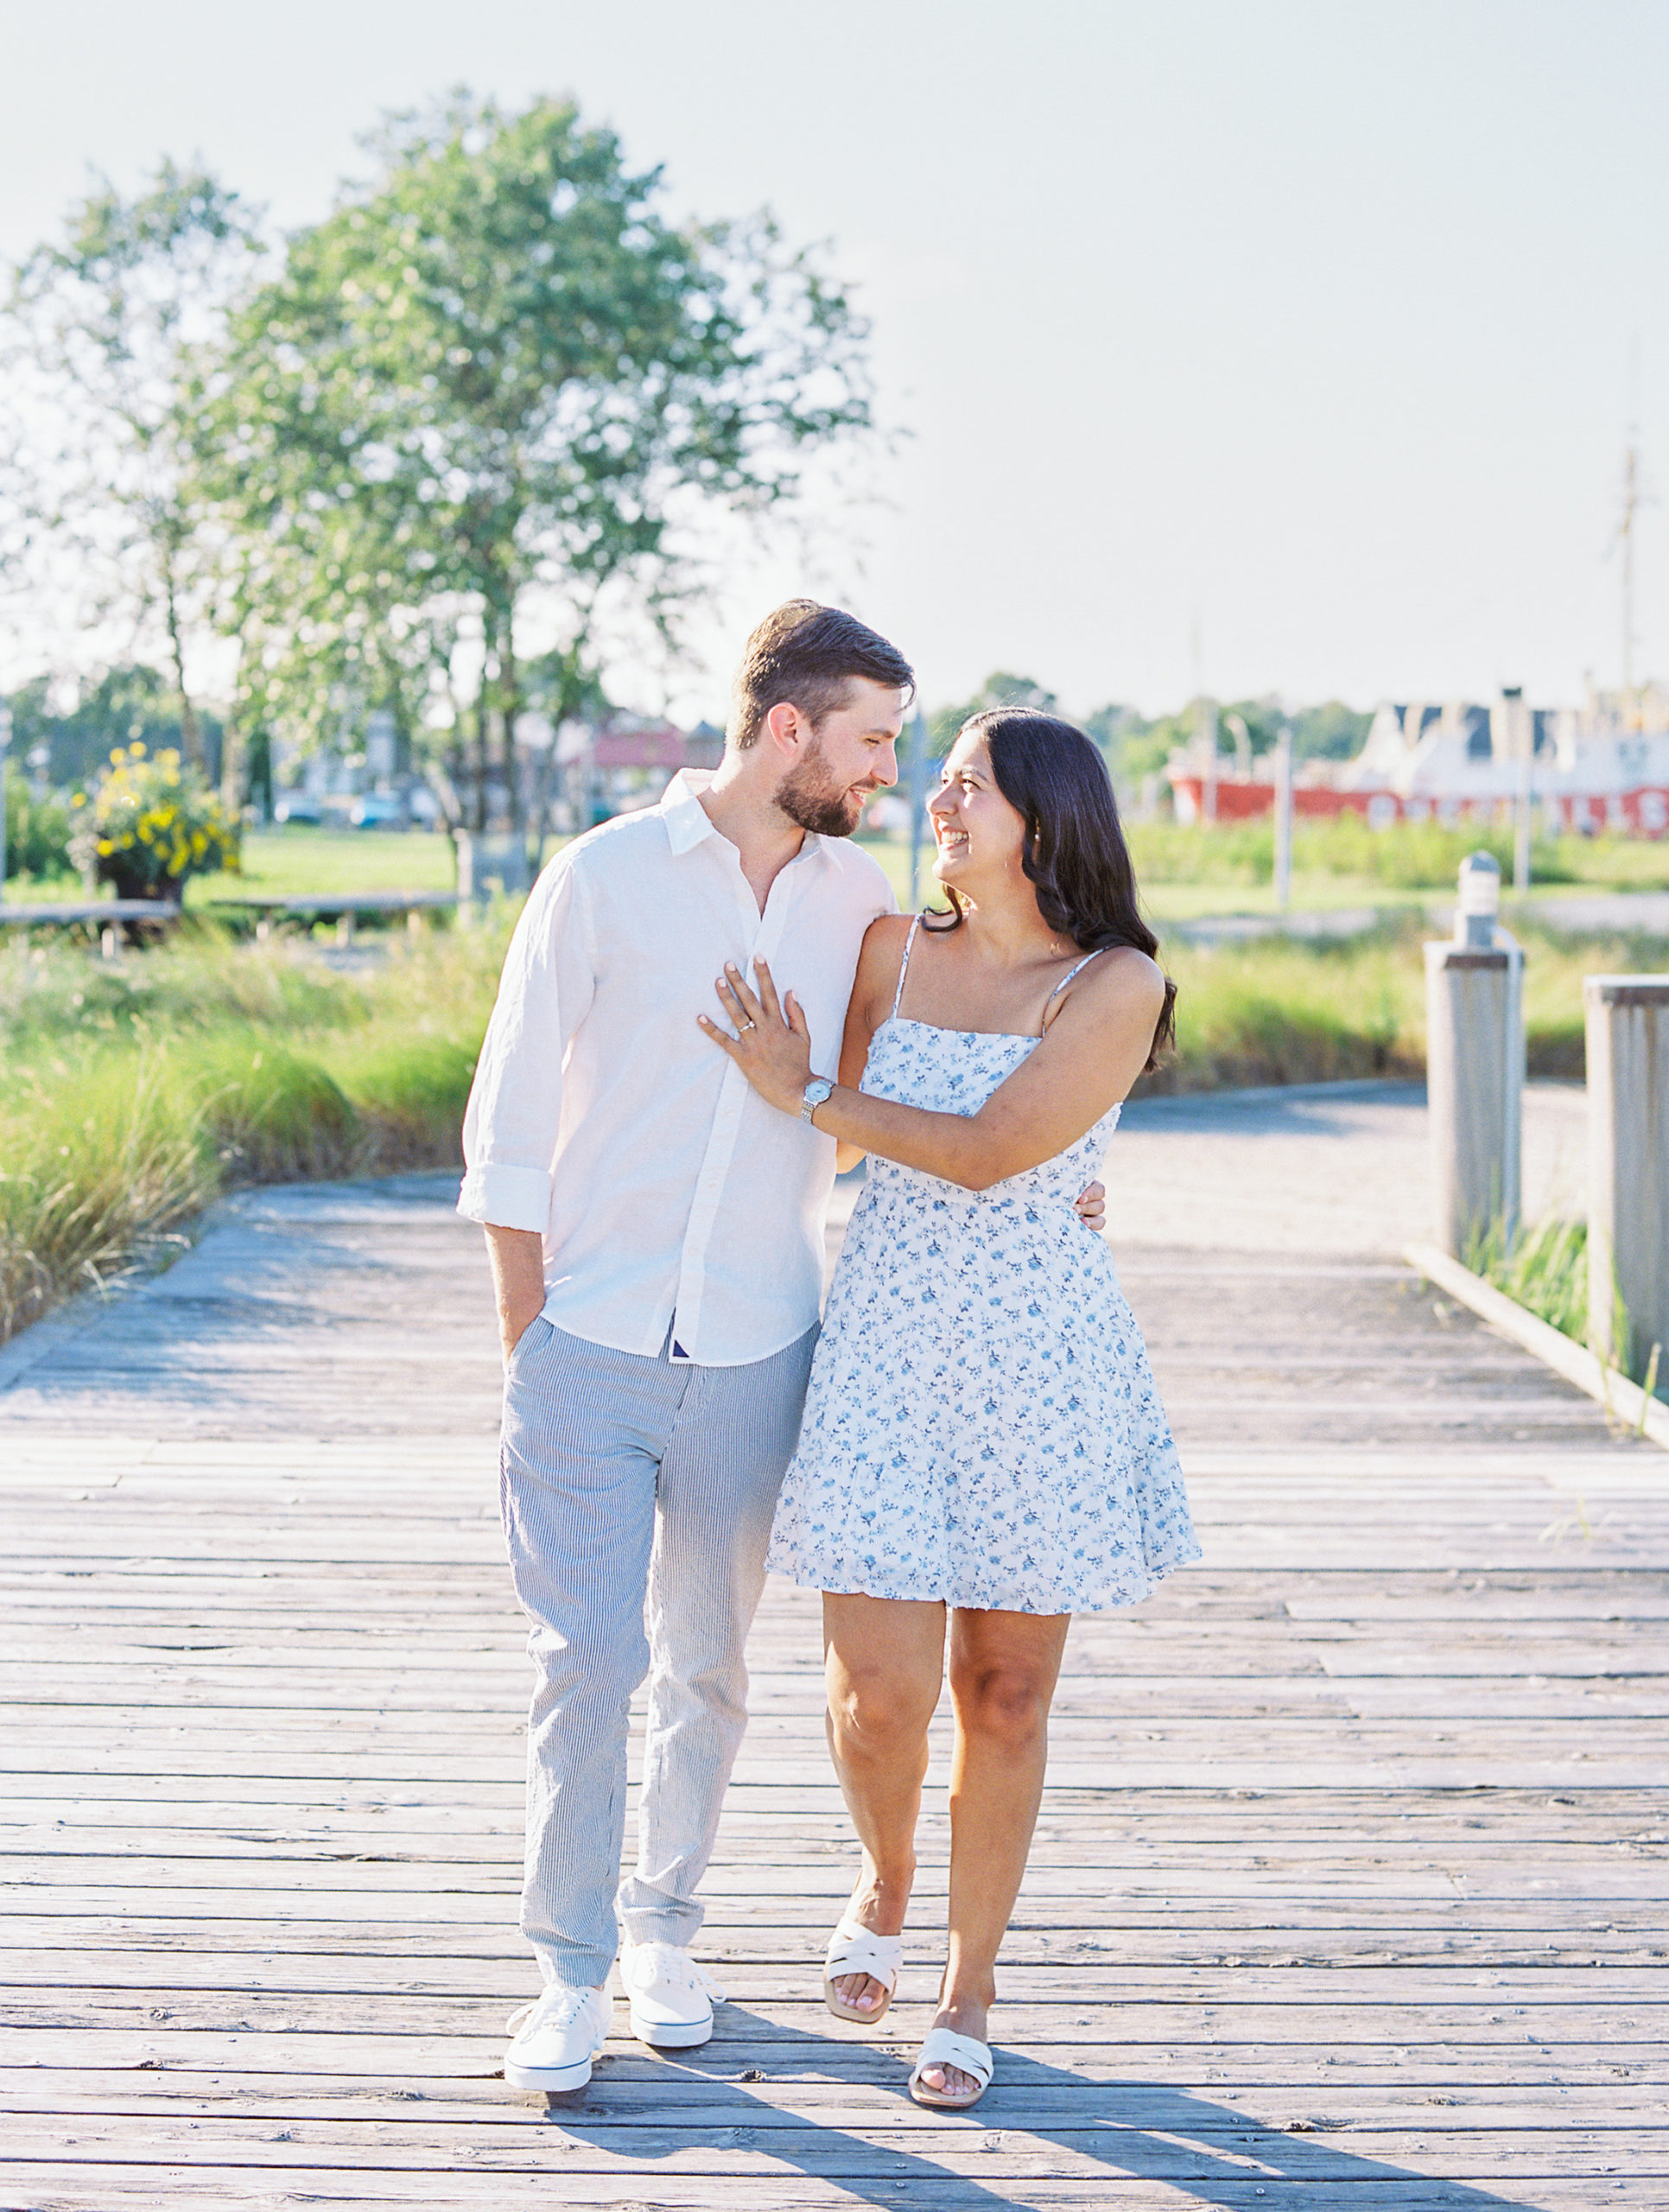 Couple smiles, walks, and laughs on wooden boat dock for Summer Lewes Engagement Session
